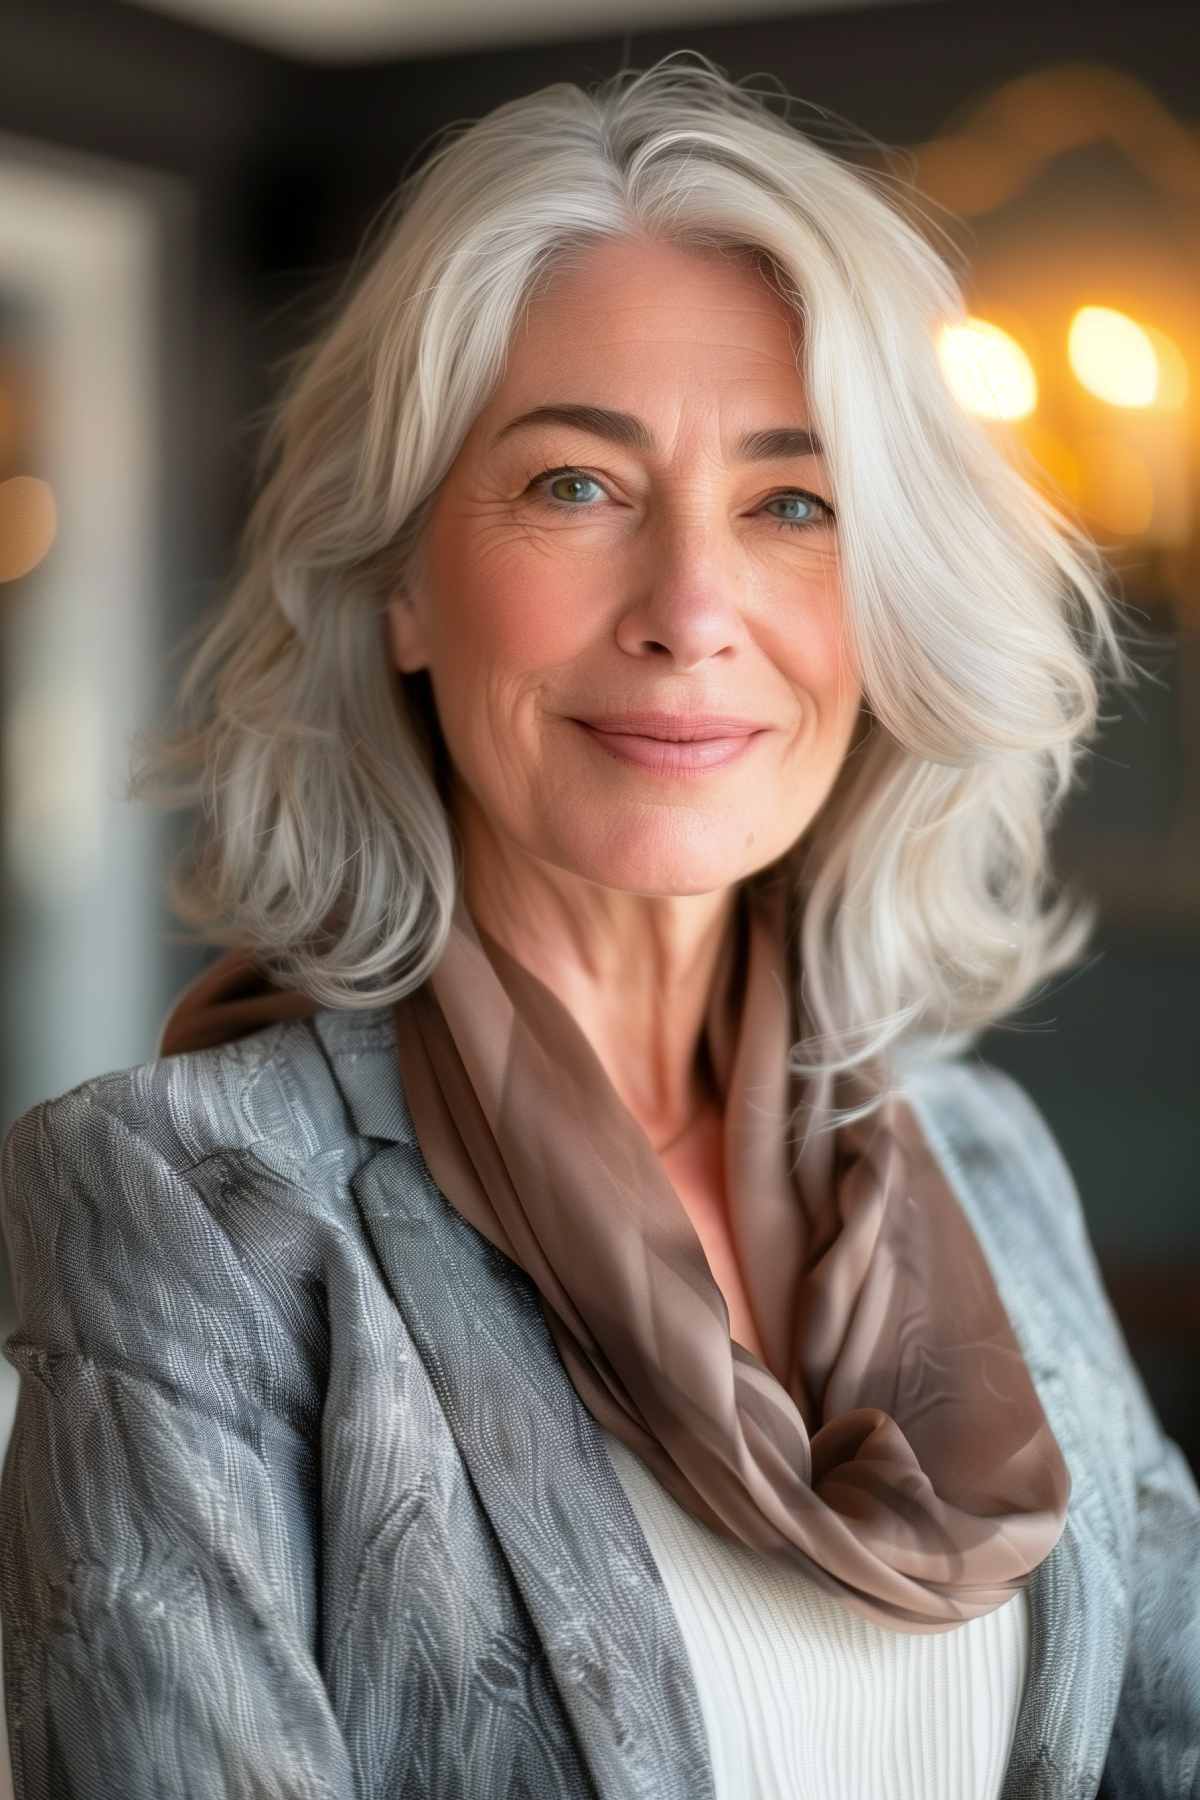 Sophisticated shoulder-length layered haircut with natural silver coloring on a woman over 50, styled to enhance facial features and provide volume.